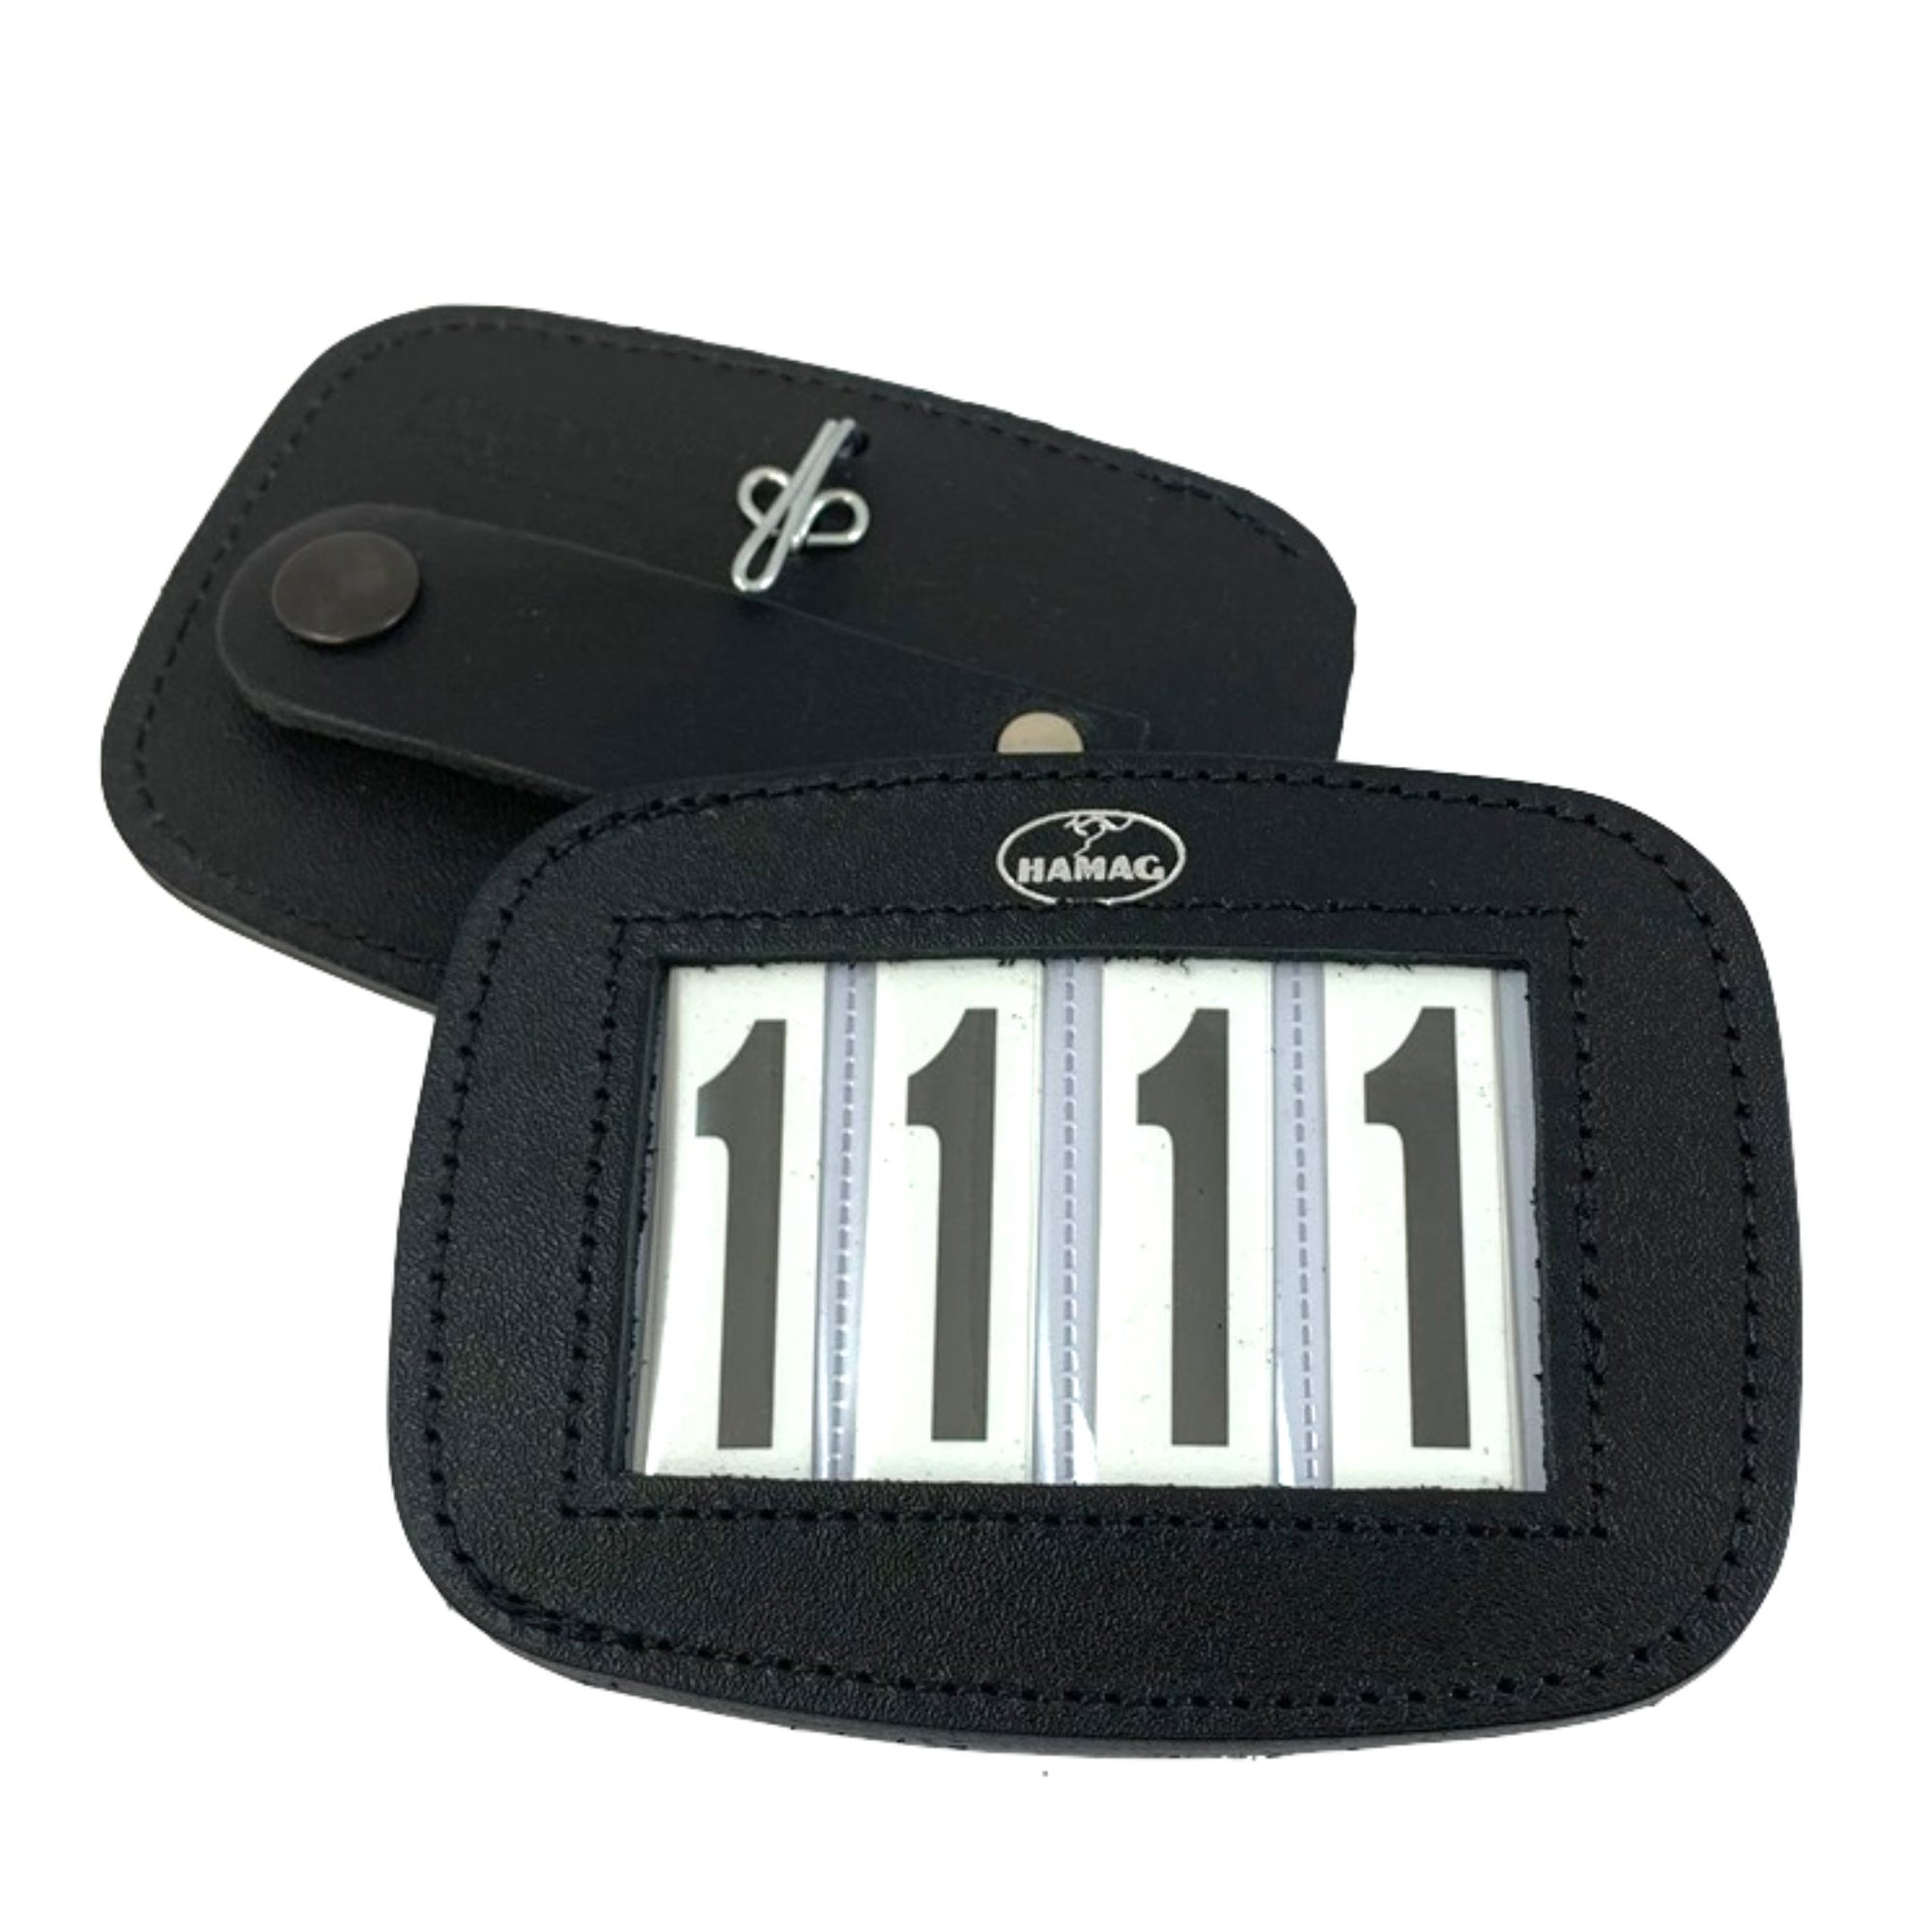 Black leather number holder with tiny Hamag logo above the slots for numbers.